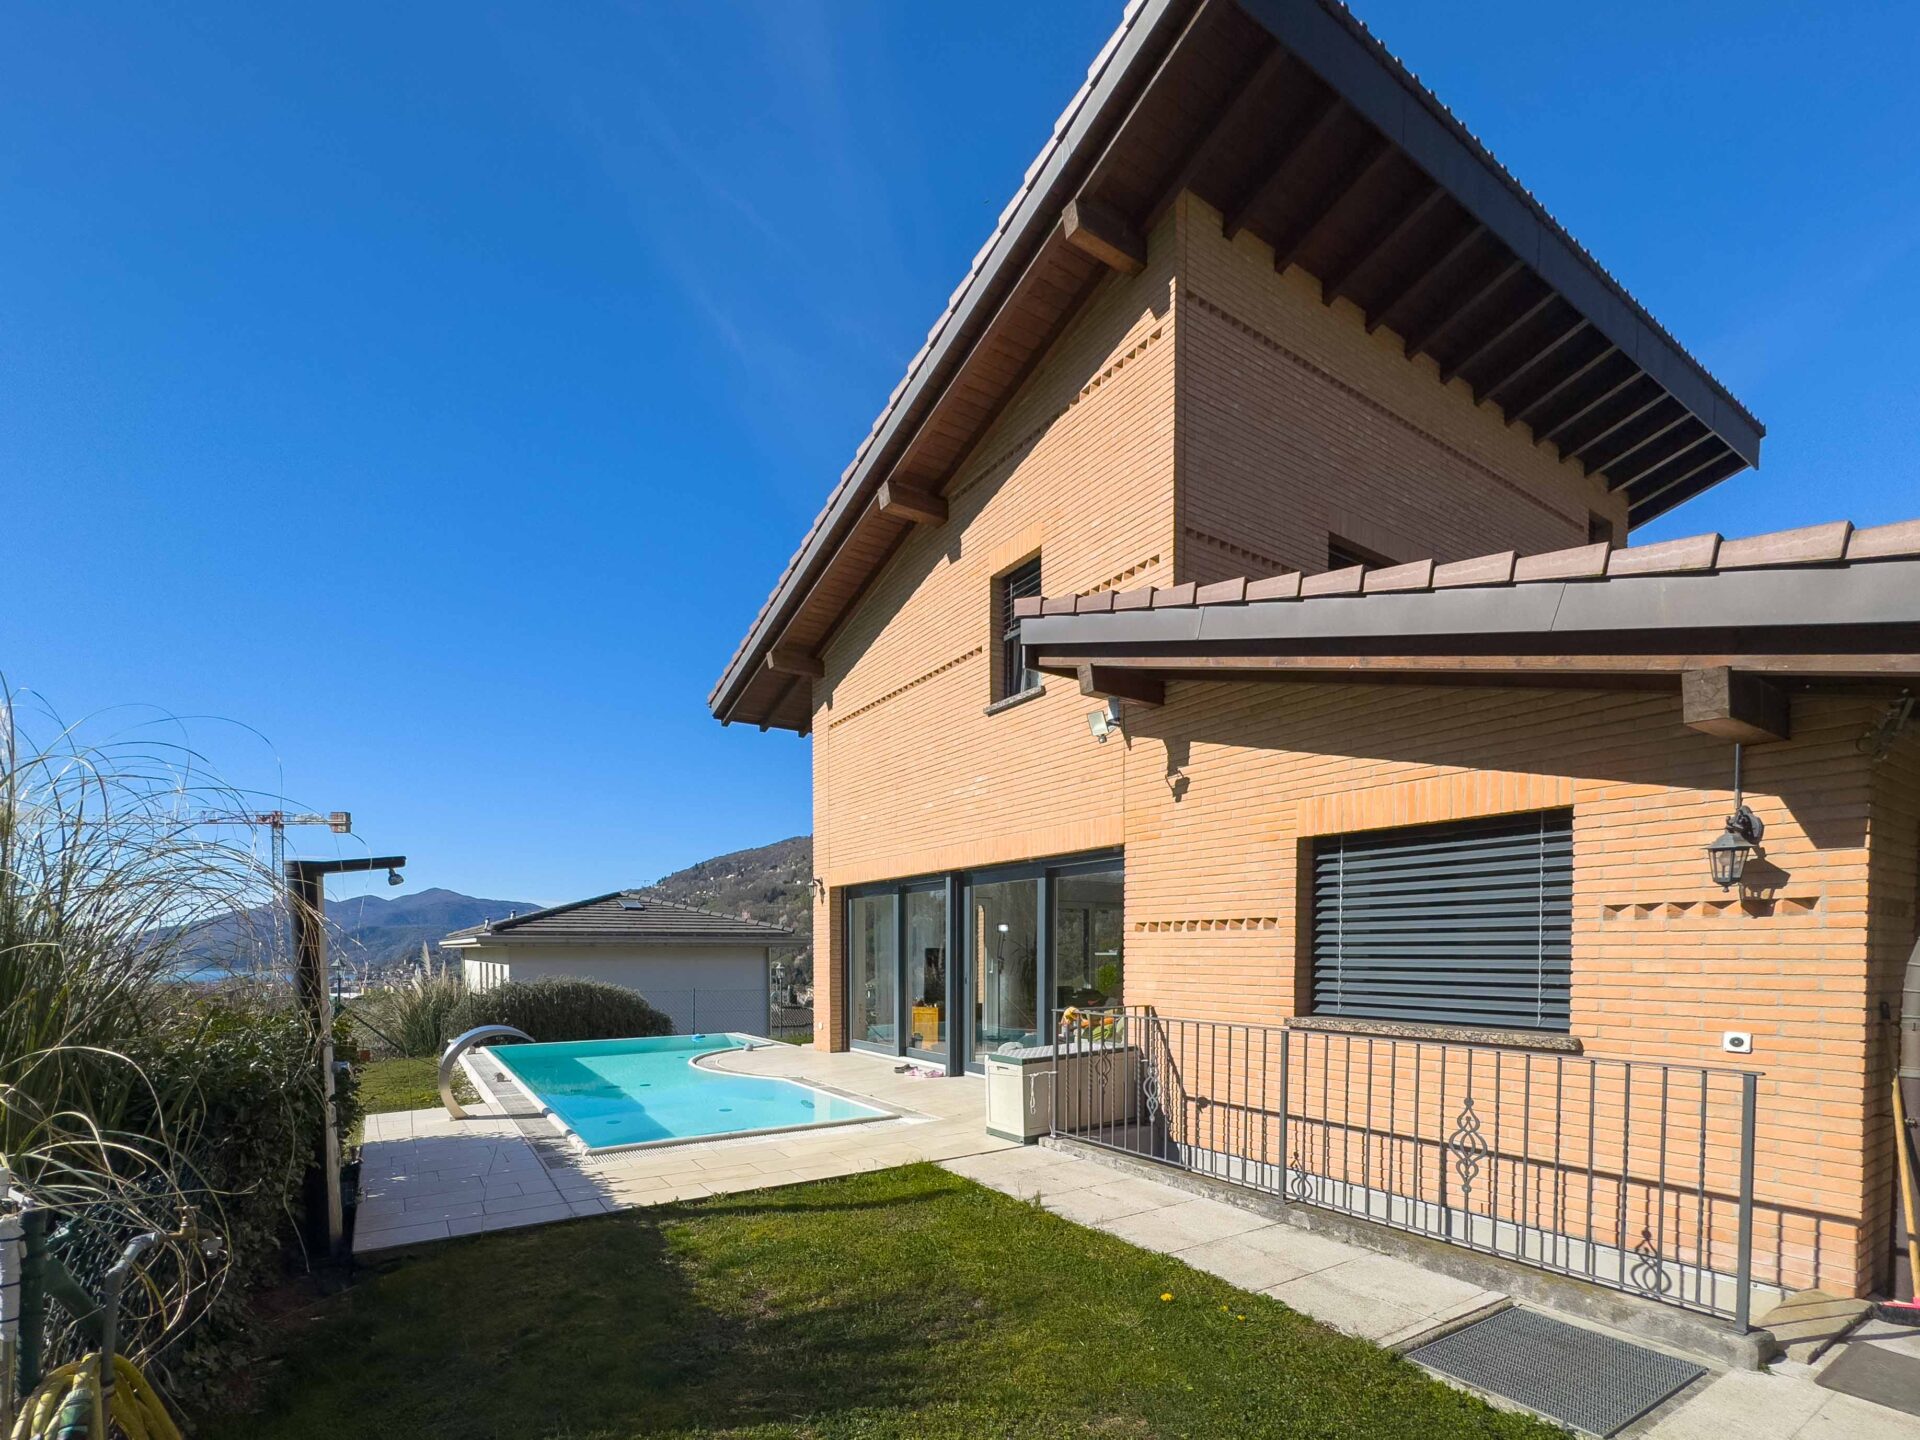 Single-family house with garden and pool for sale in Bioggio